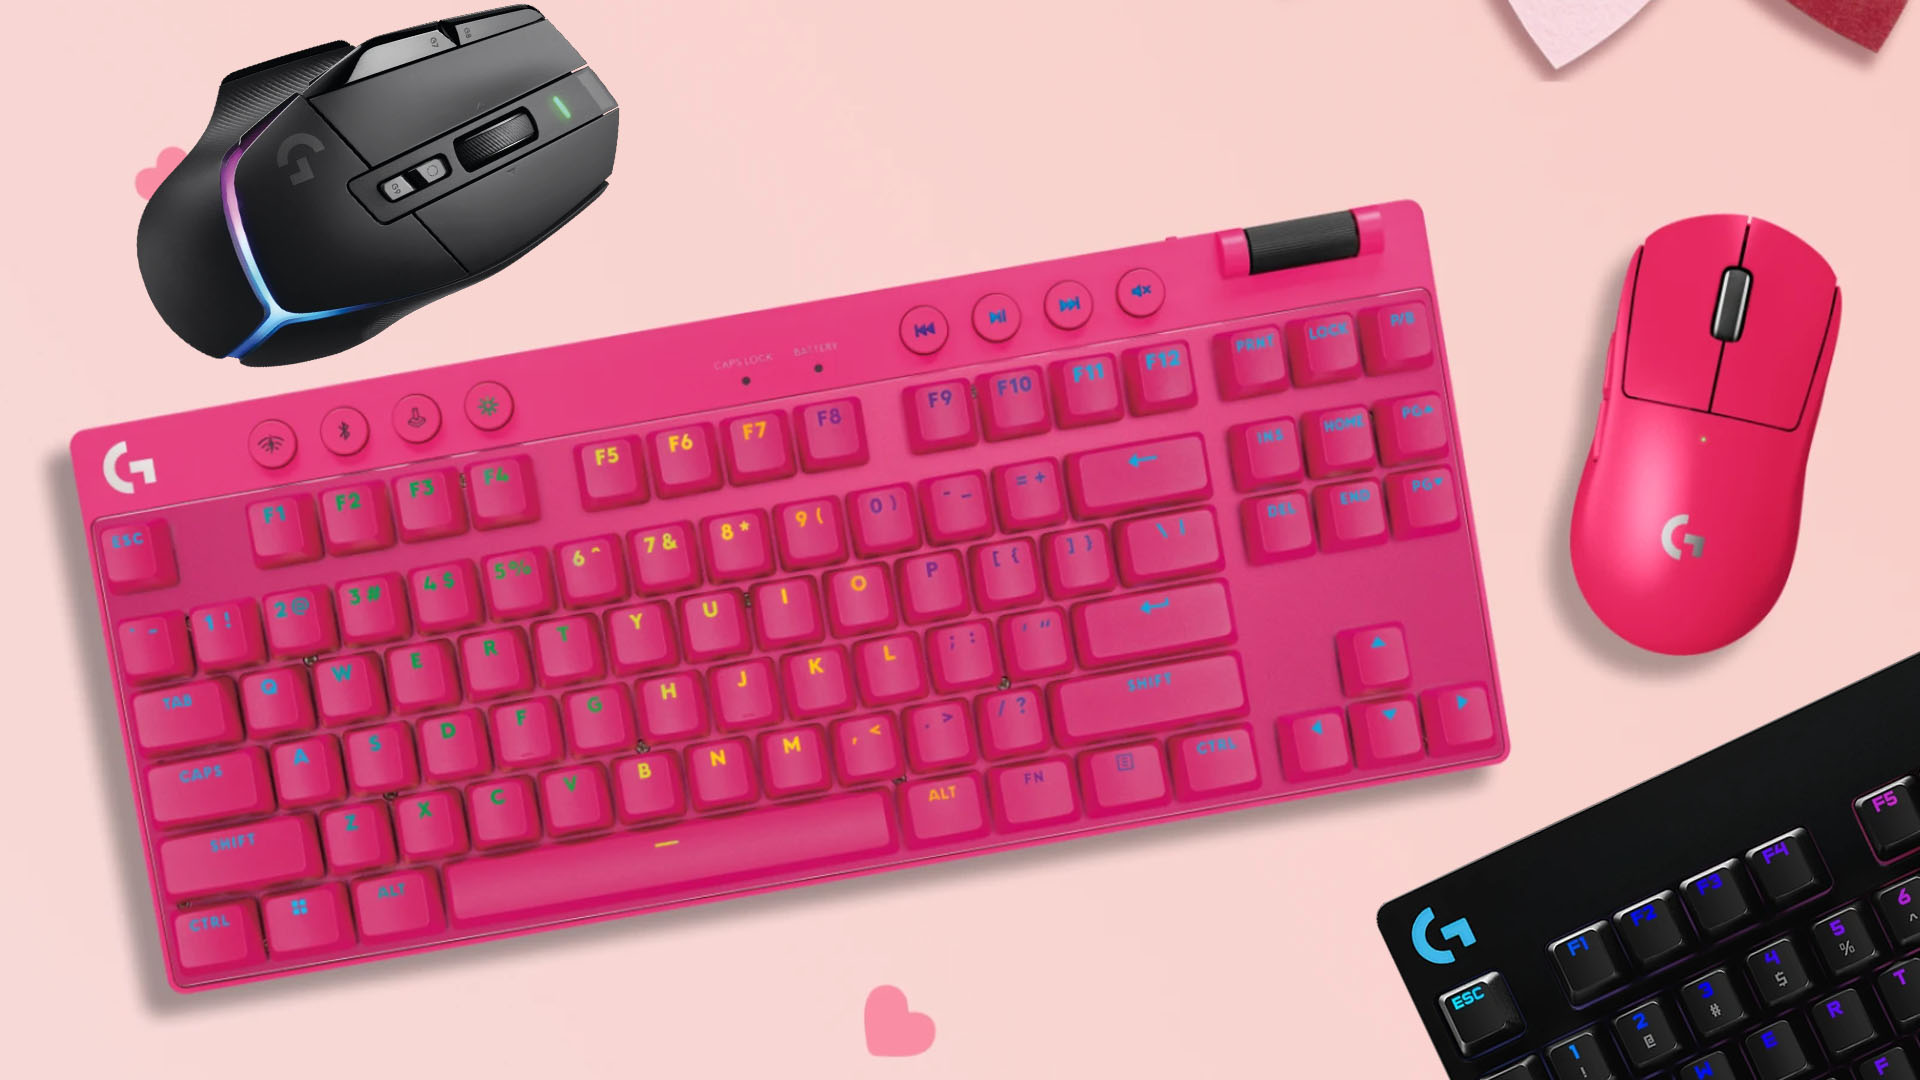 Save up to $95 on Logitech keyboard and mouse bundles right now